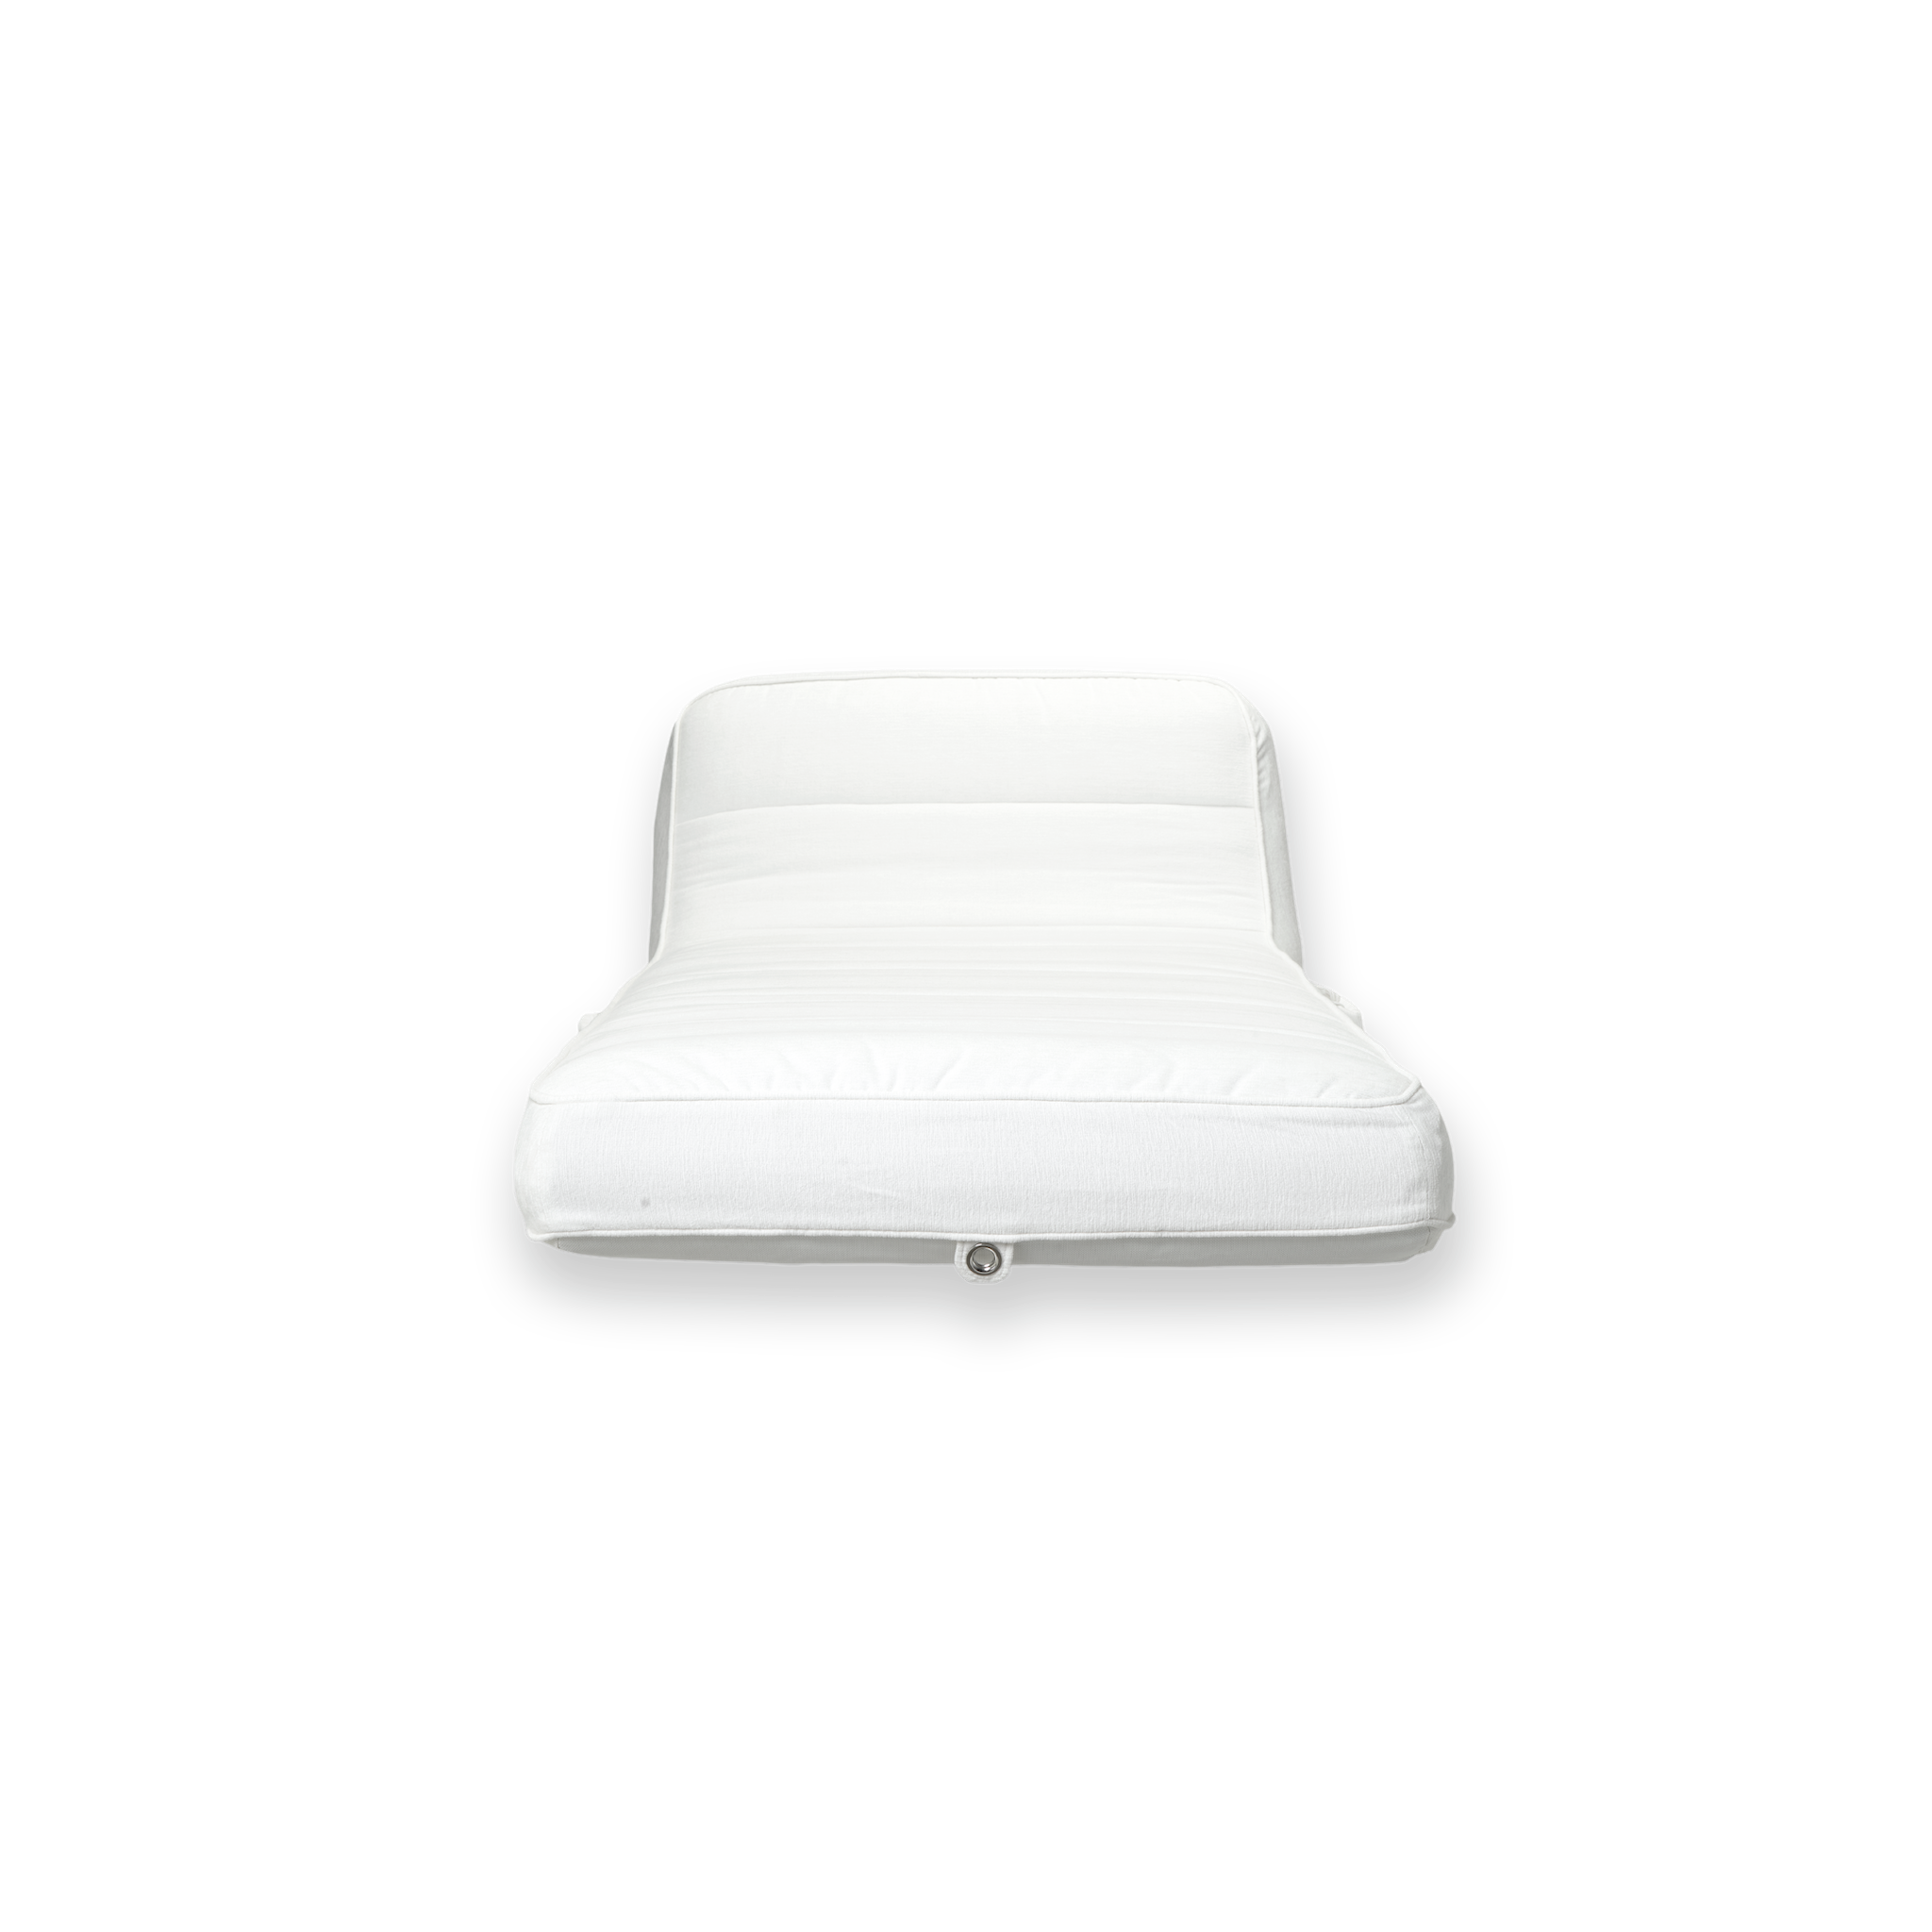 The front profile of a single white terry toweled luxury pool float.